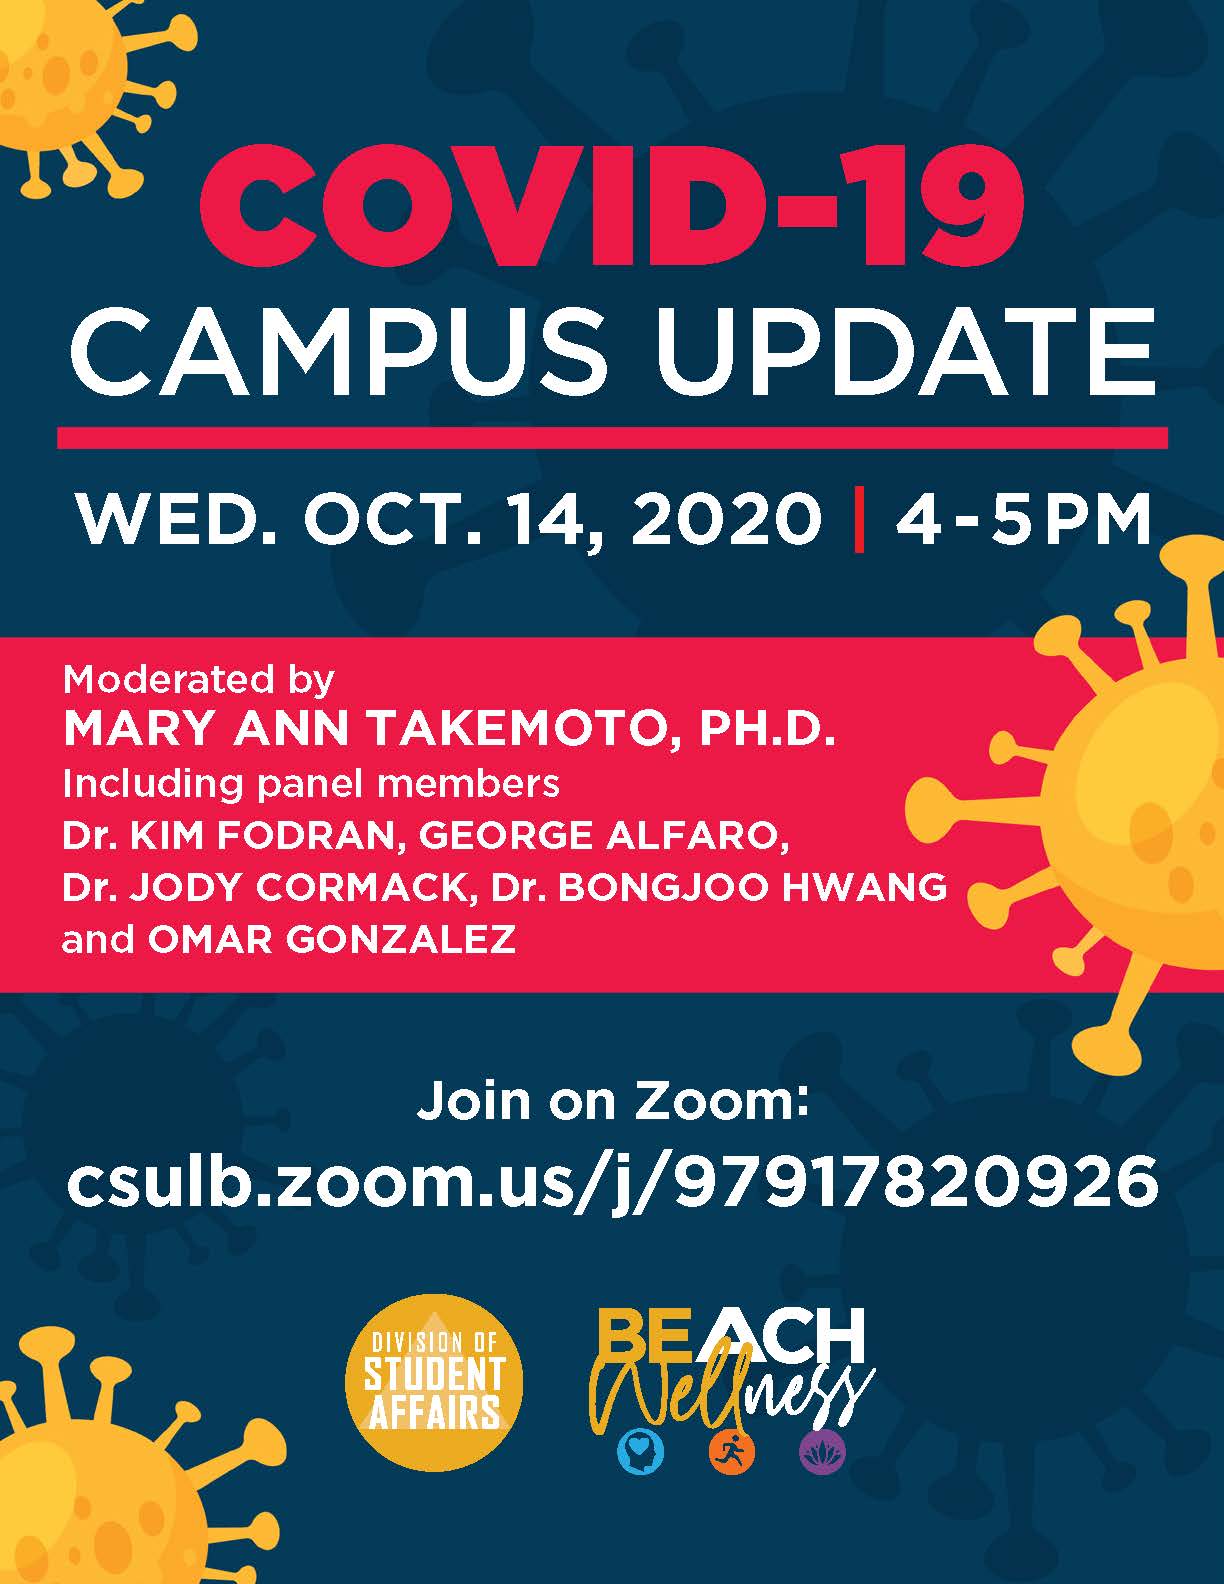 COVID 19 Campus update poster